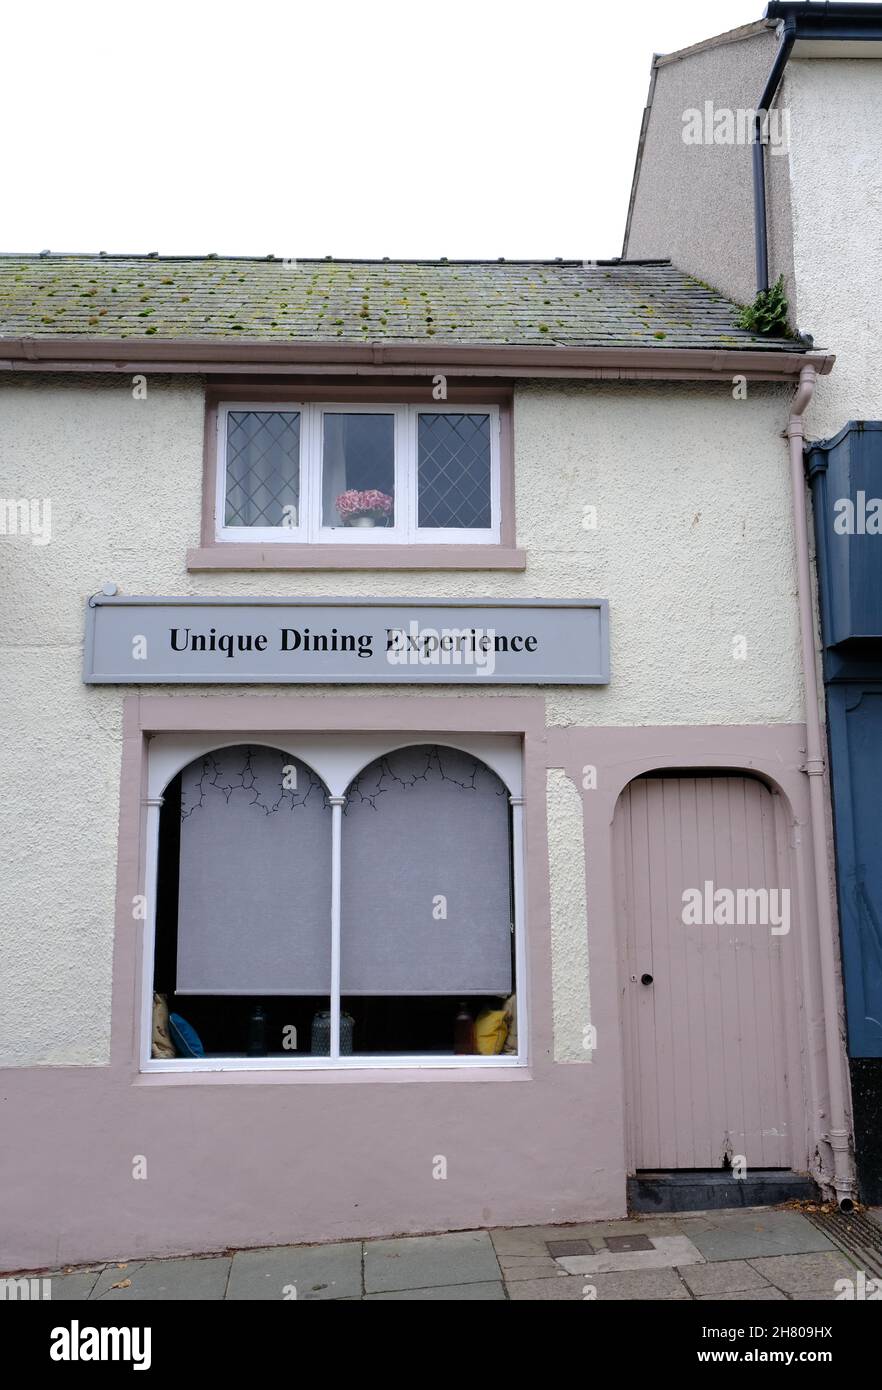 An exterior view of a Welsh seaside restaurant with the sign advertising an amusing and questionable unique dining experience. Stock Photo